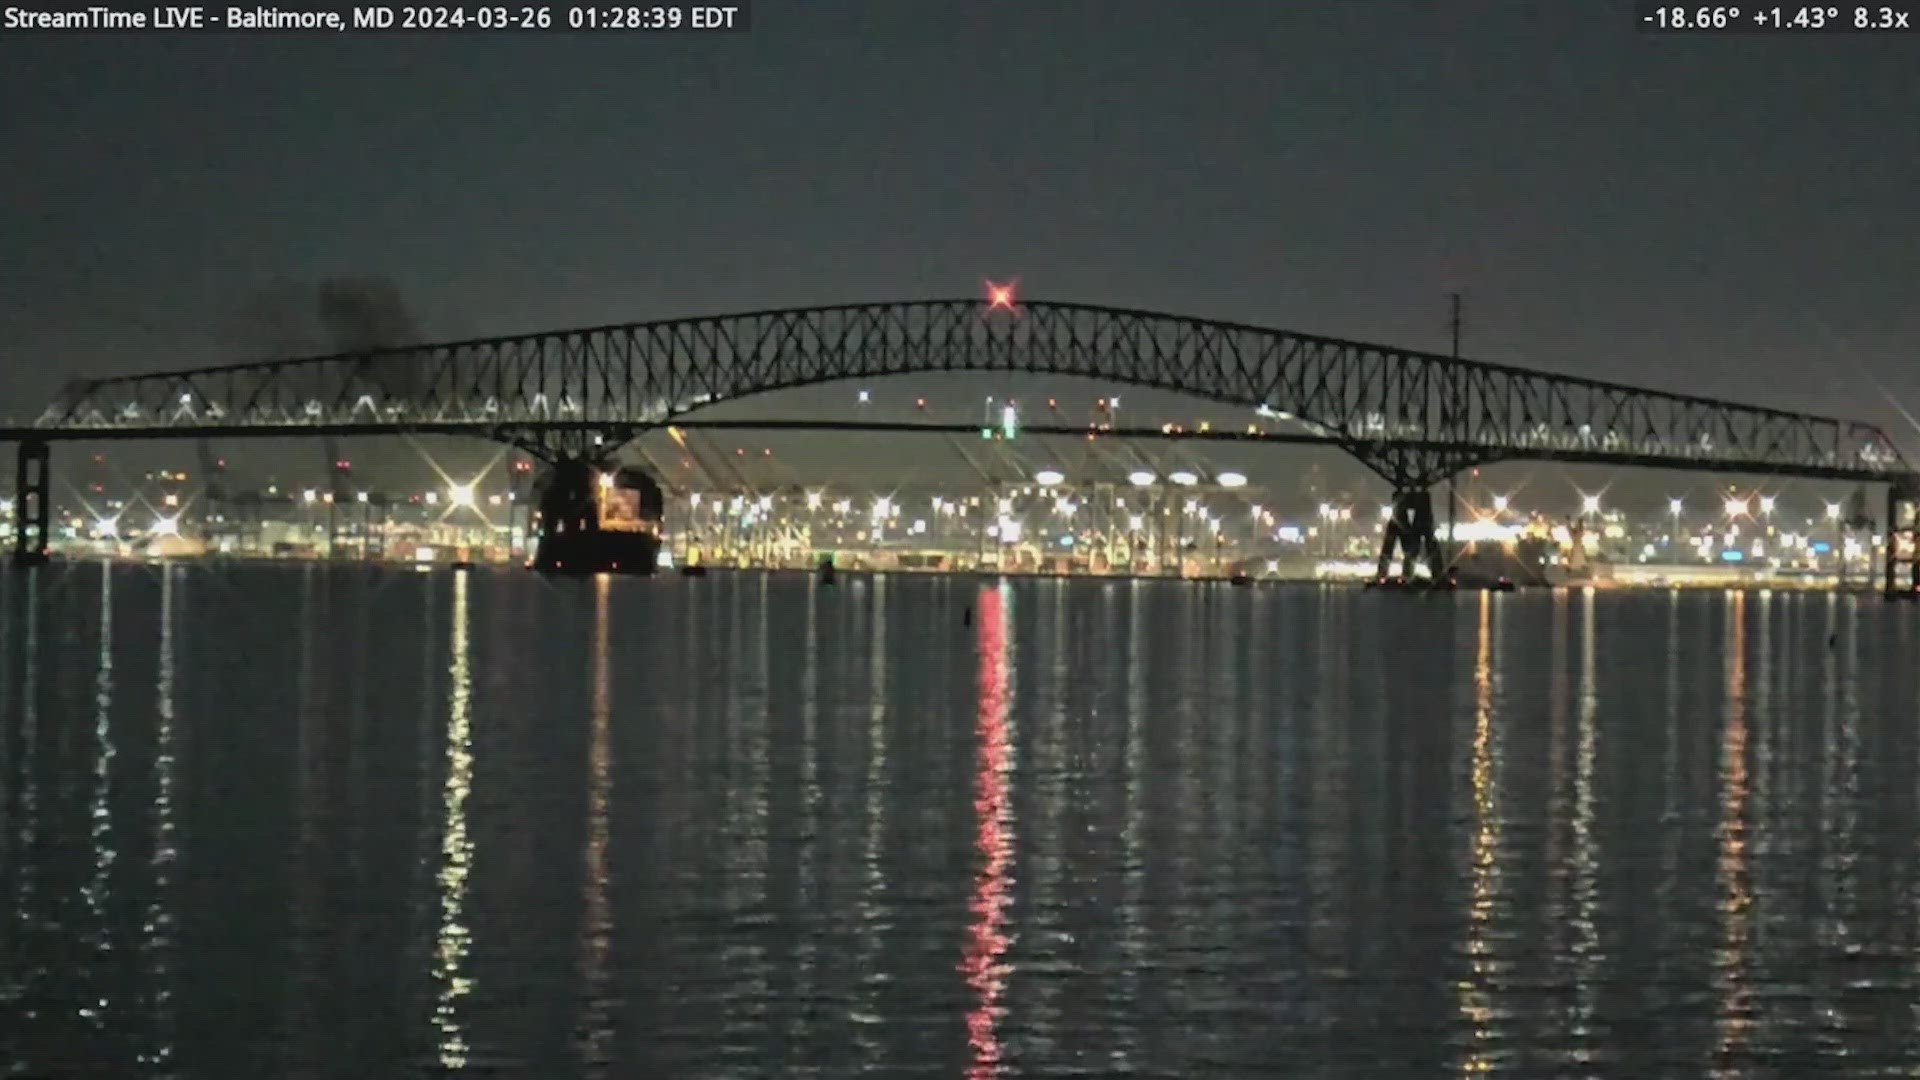 For the first time tonight, we are hearing that mayday call to dispatchers as the container ship crashed into the Baltimore Key Bridge.